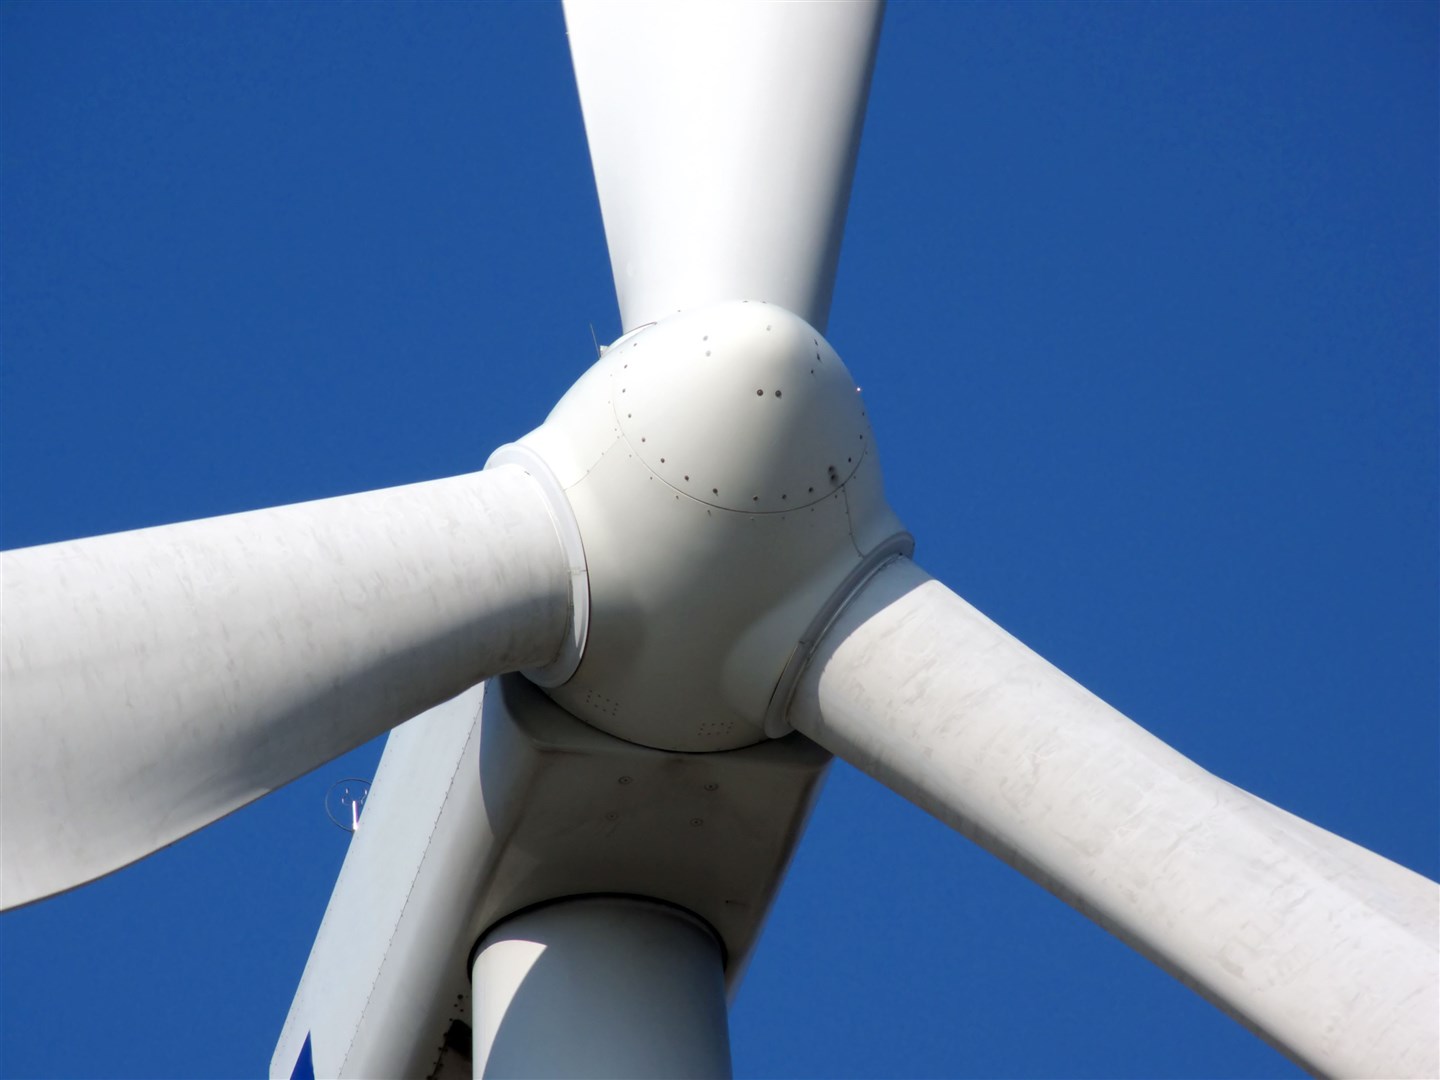 The grants are funded through contributions from a Ross wind farm operator.